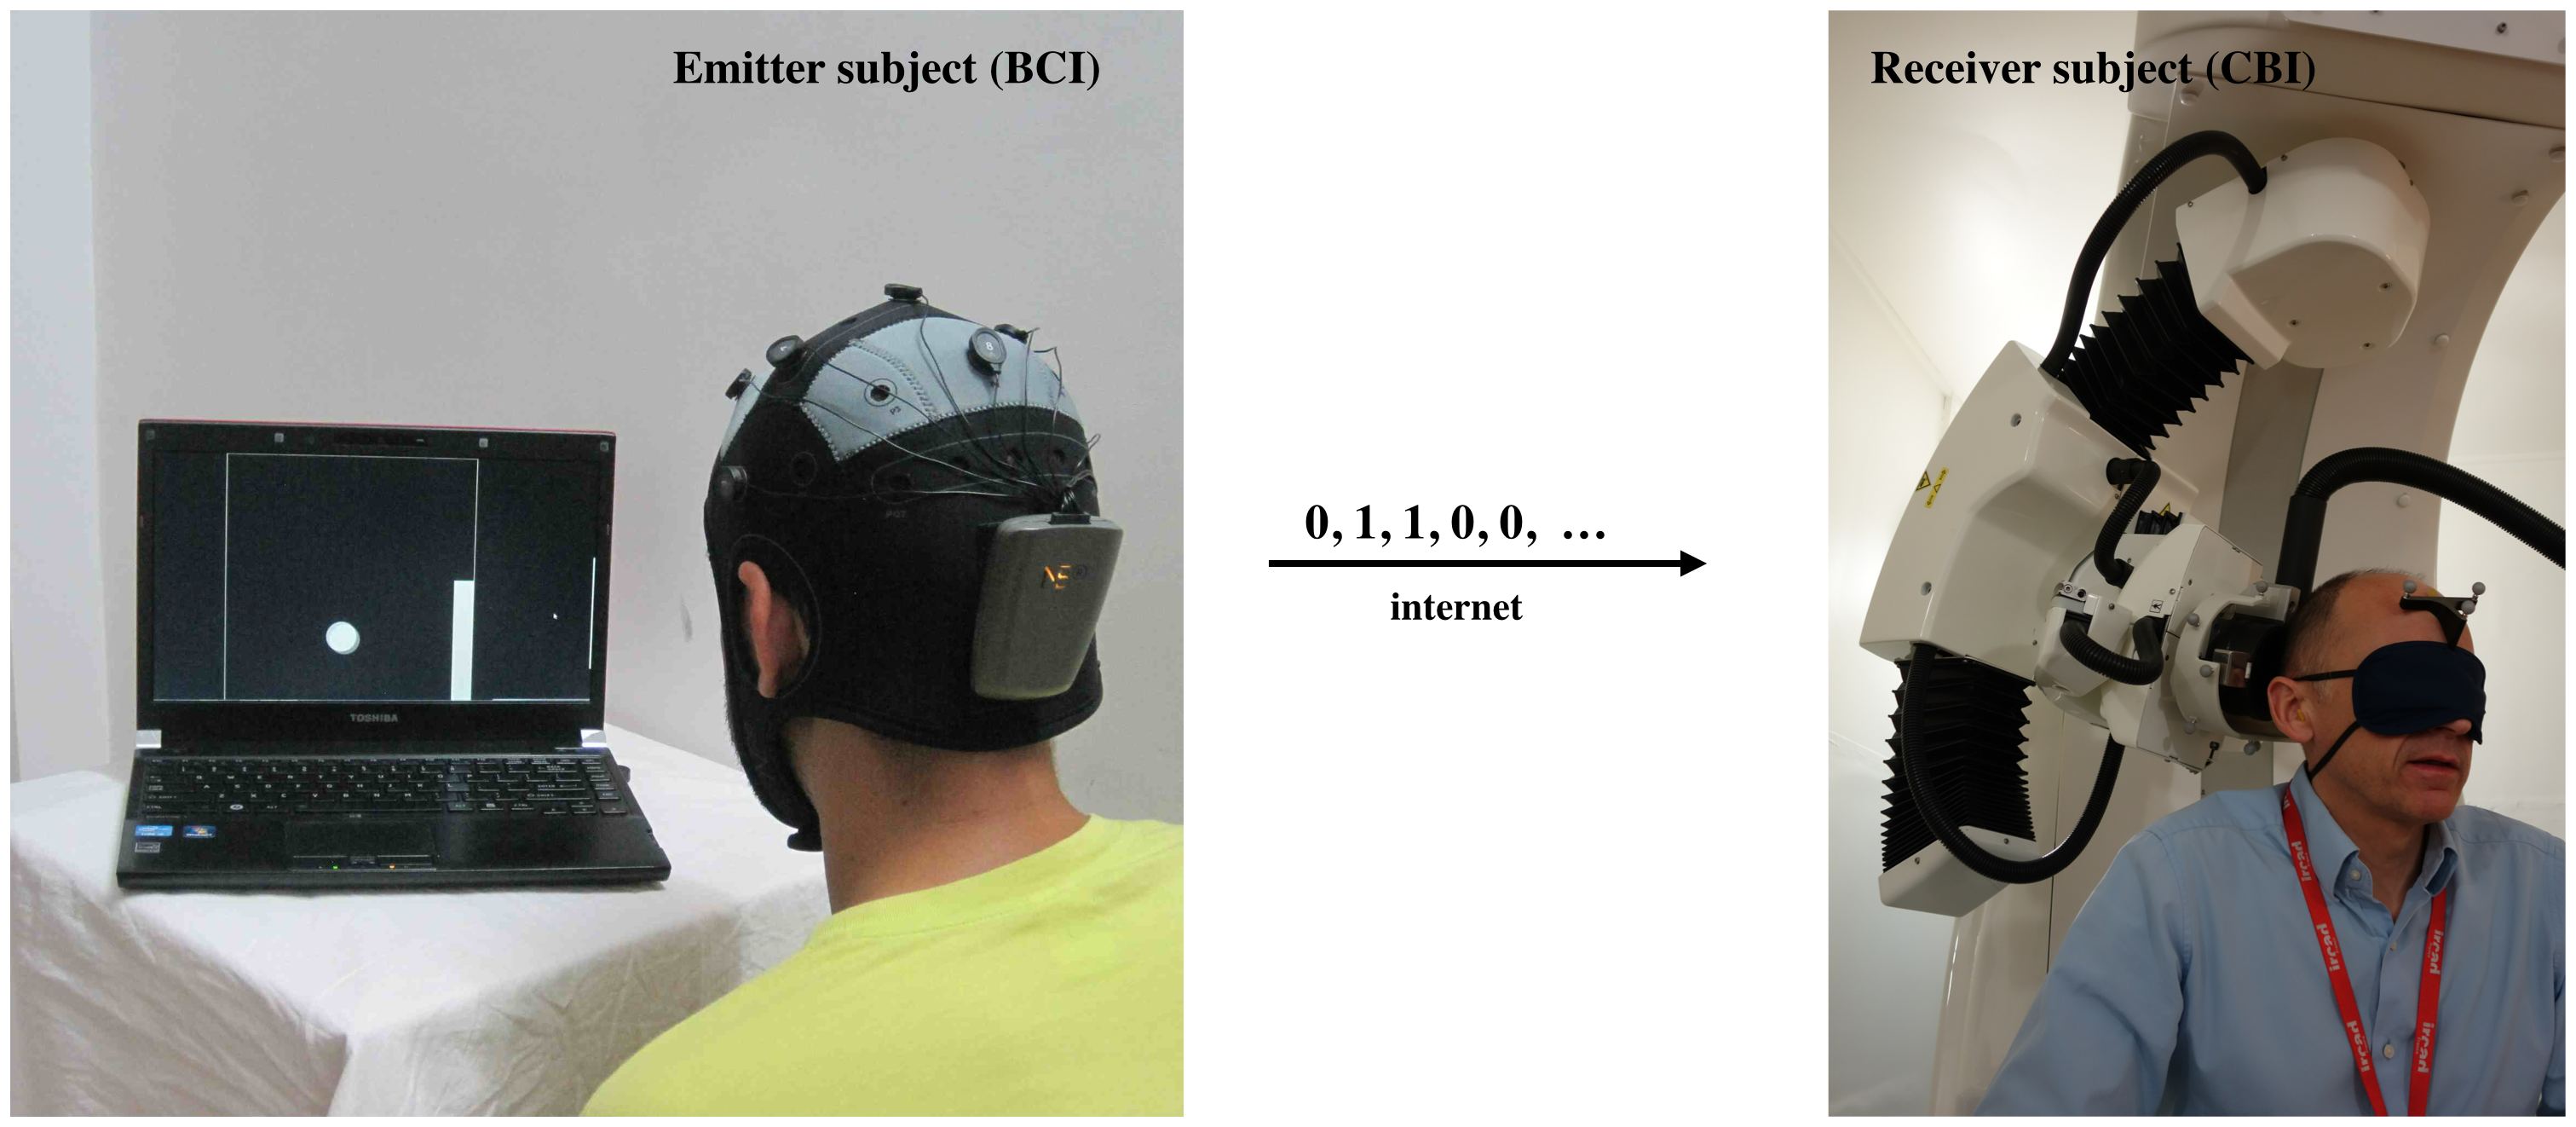 Figure 2. View of emitter and receiver subjects with non-invasive devices supporting, respectively, the BCI based on EEG changes driven by motor imagery (left) and the CBI based on the reception of phosphenes elicited by a neuronavigated TMS (right) components of the B2B transmission system. The successfully transmitted code in the particular scenario shown is a ‘0’: the target and ball are at the bottom of the screen (correctly encoding a 0 through motor imagery of the feet) and the TMS coil is in the orientation not producing phosphenes for this particular participant (subject 2, see Figure 3), with the handle pointing upwards.